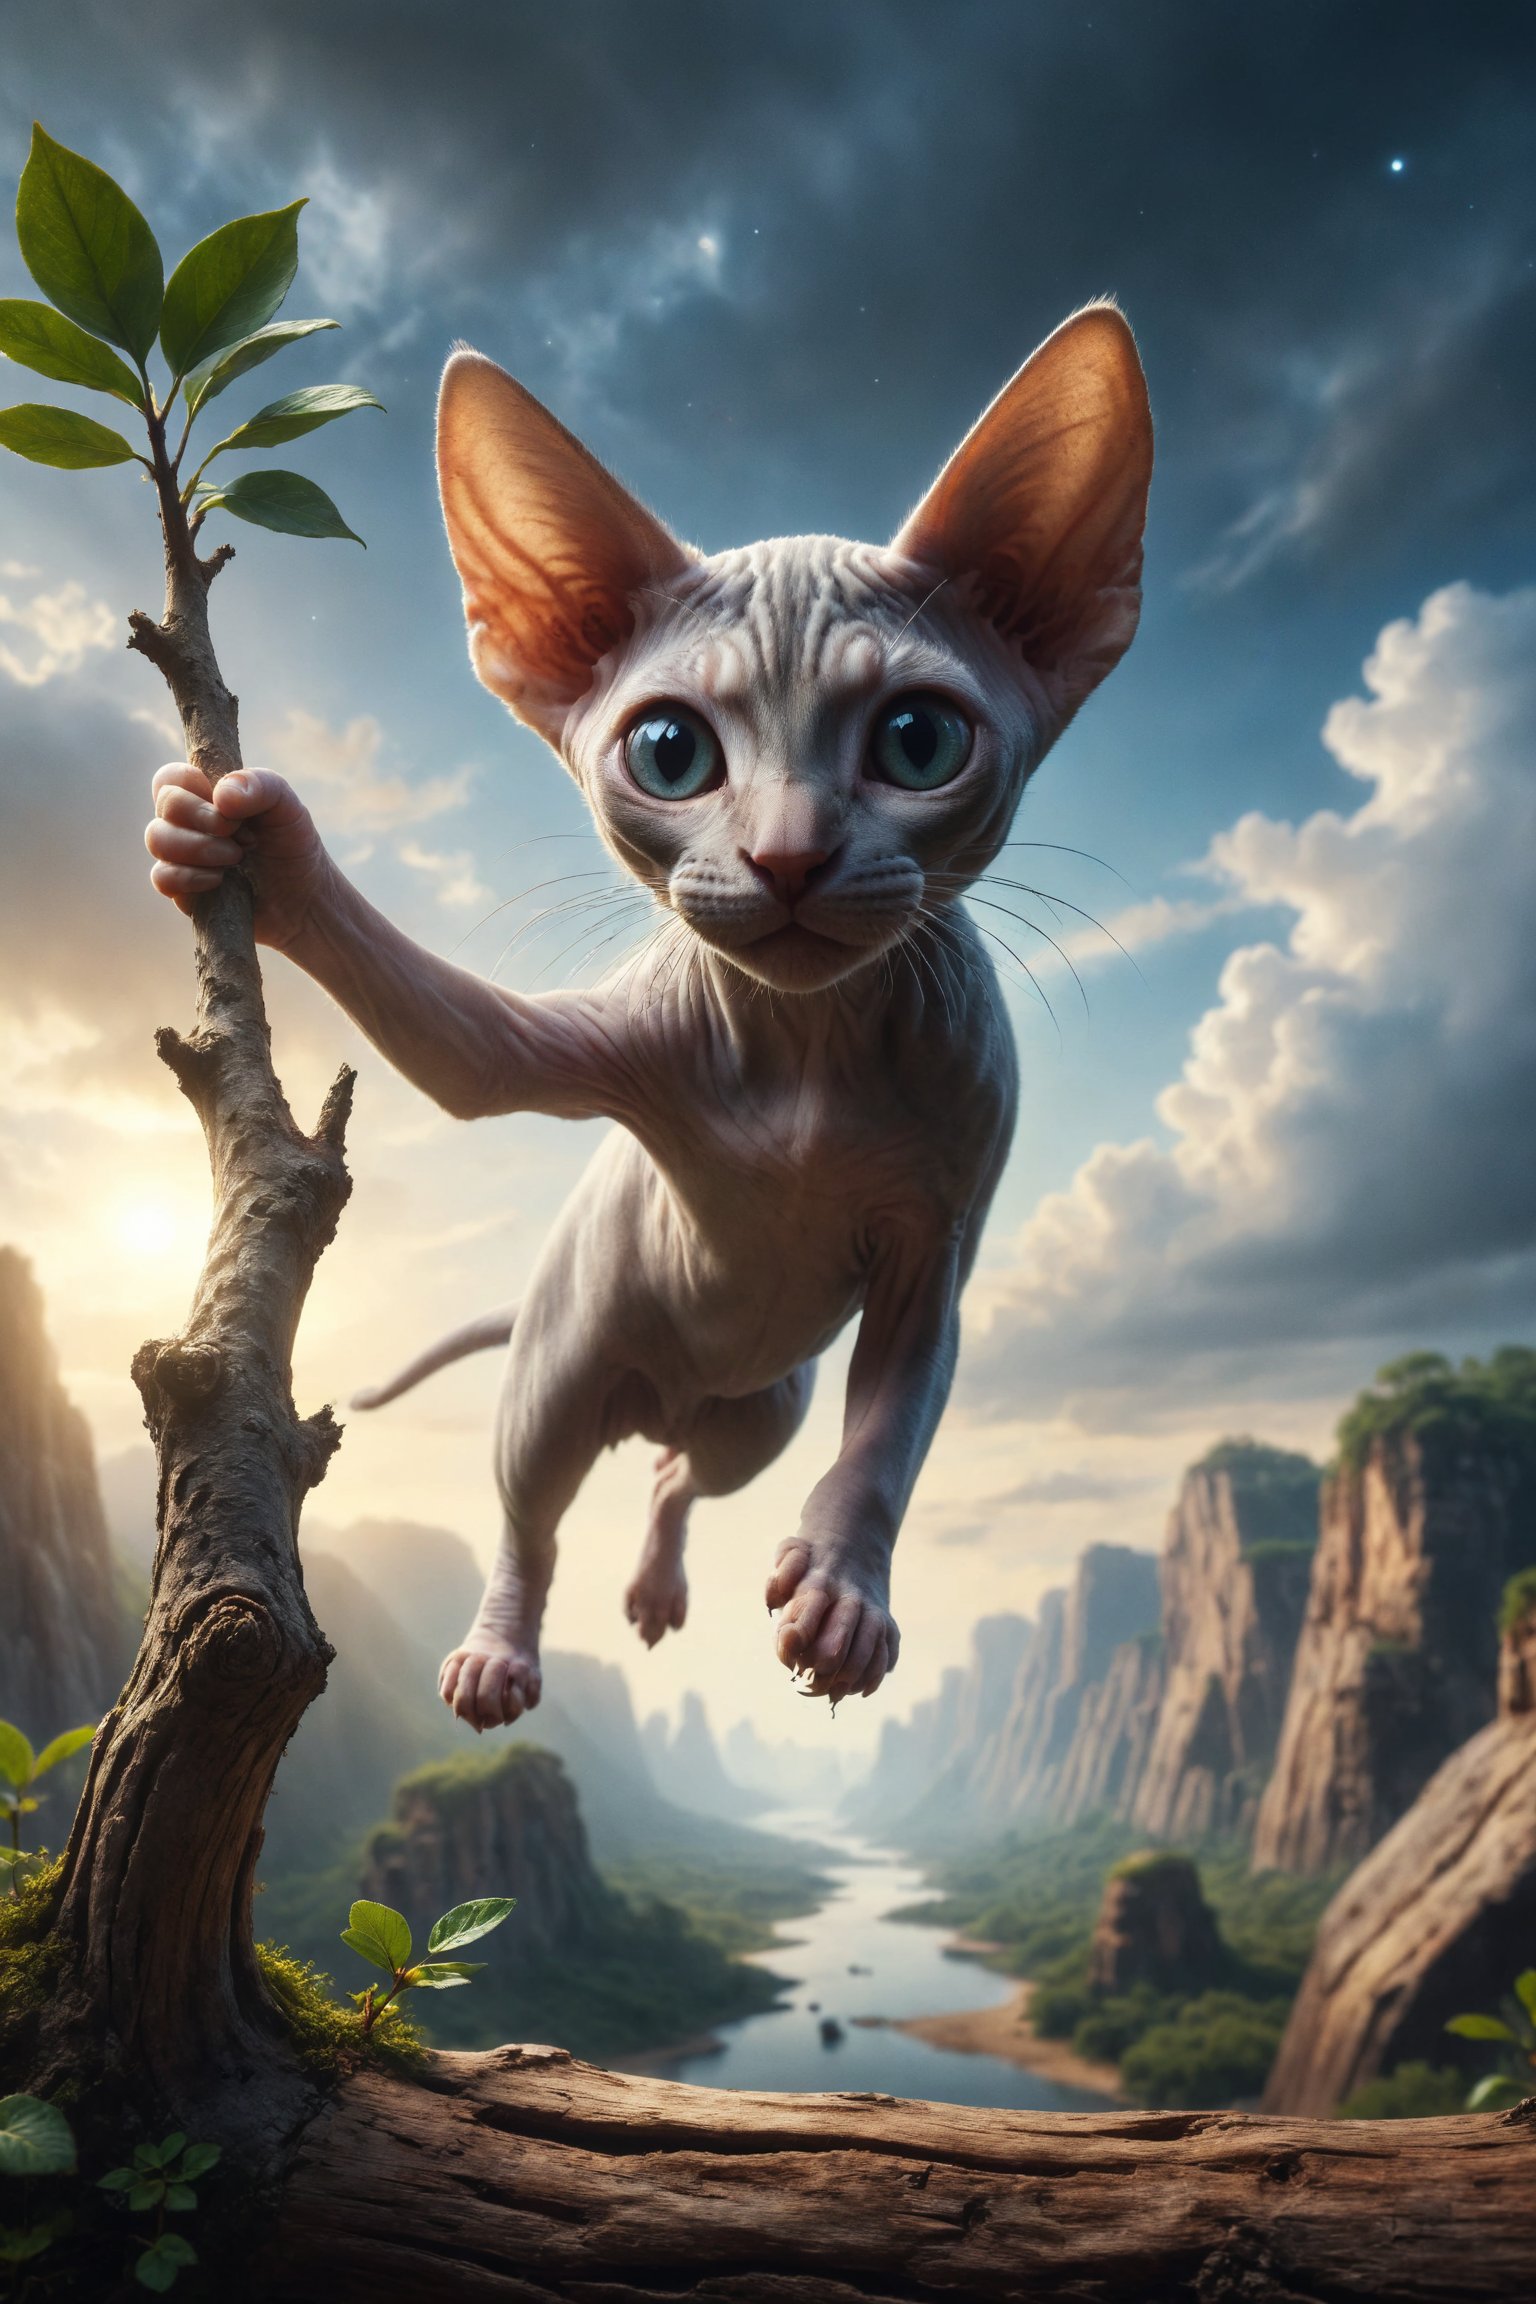 Design an image of a young Sphynx cat excitedly holding a wooden branch, looking towards an open horizon, symbolizing curiosity, adventure and new beginnings.